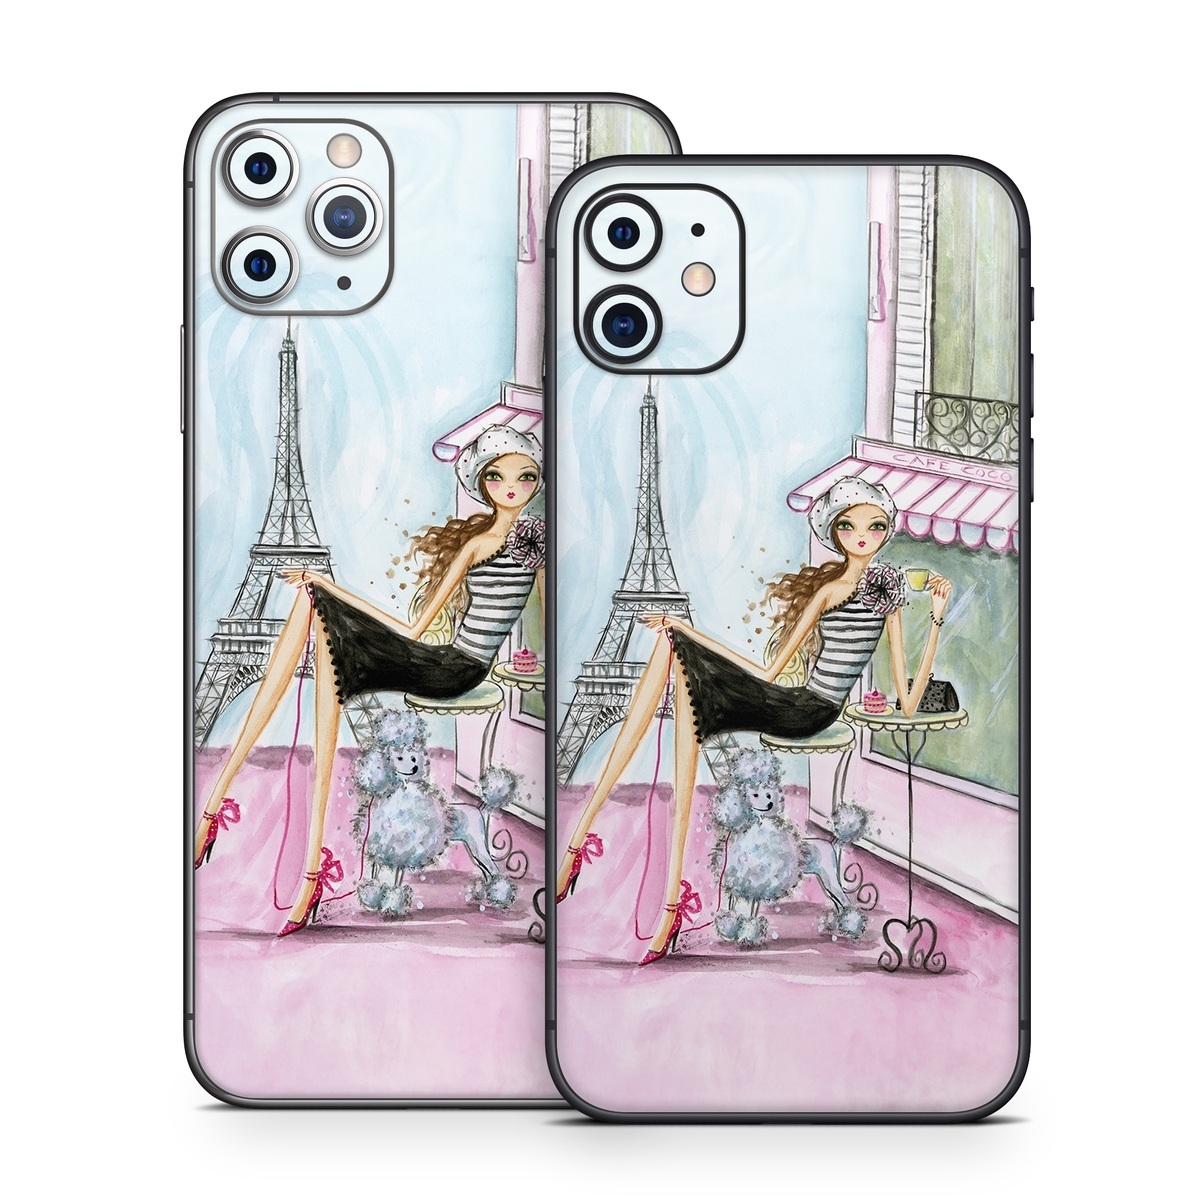 iPhone 11 Series Skin design of Pink, Illustration, Sitting, Konghou, Watercolor paint, Fashion illustration, Art, Drawing, Style, with gray, purple, blue, black, pink colors